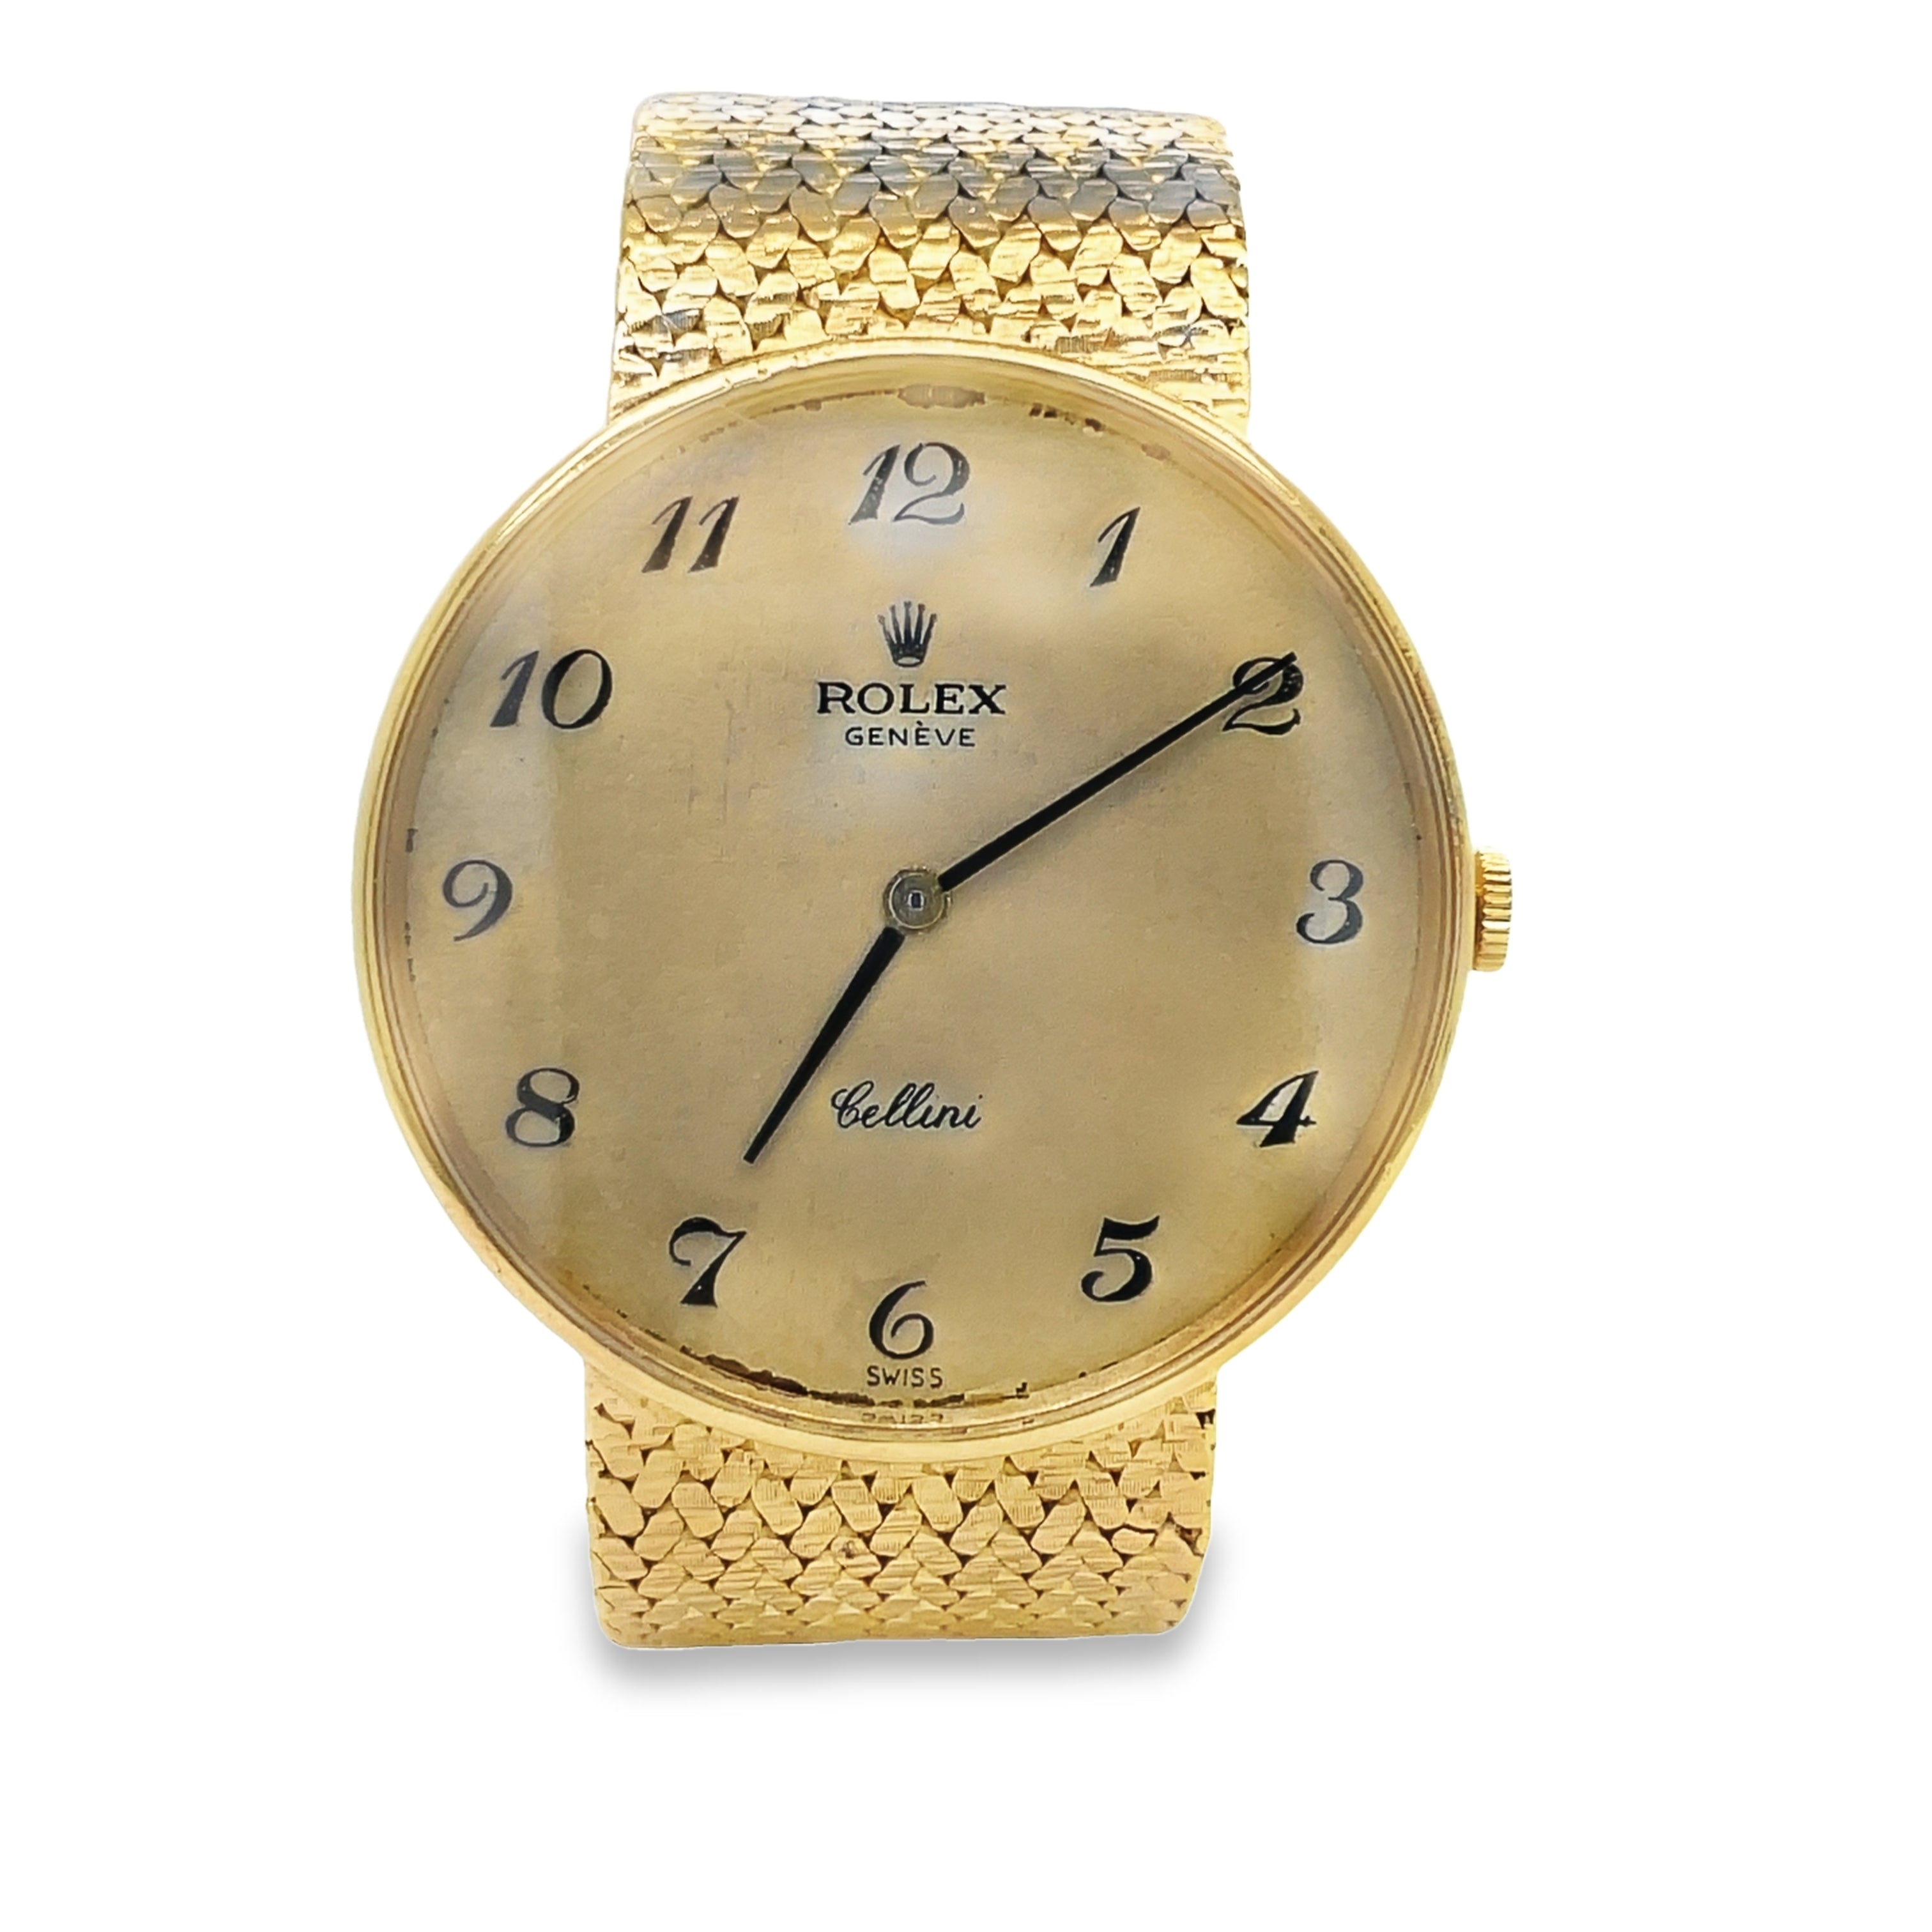 Crafted with exquisite 18k yellow gold, this Estate Rolex Cellini Classic Vintage Mens Watch exudes timeless elegance. The manual wind and easy clasp system provide effortless use, while the numeral hour adds a touch of sophistication. In great condition and est. 1970, this vintage timepiece is a true investment in luxury.